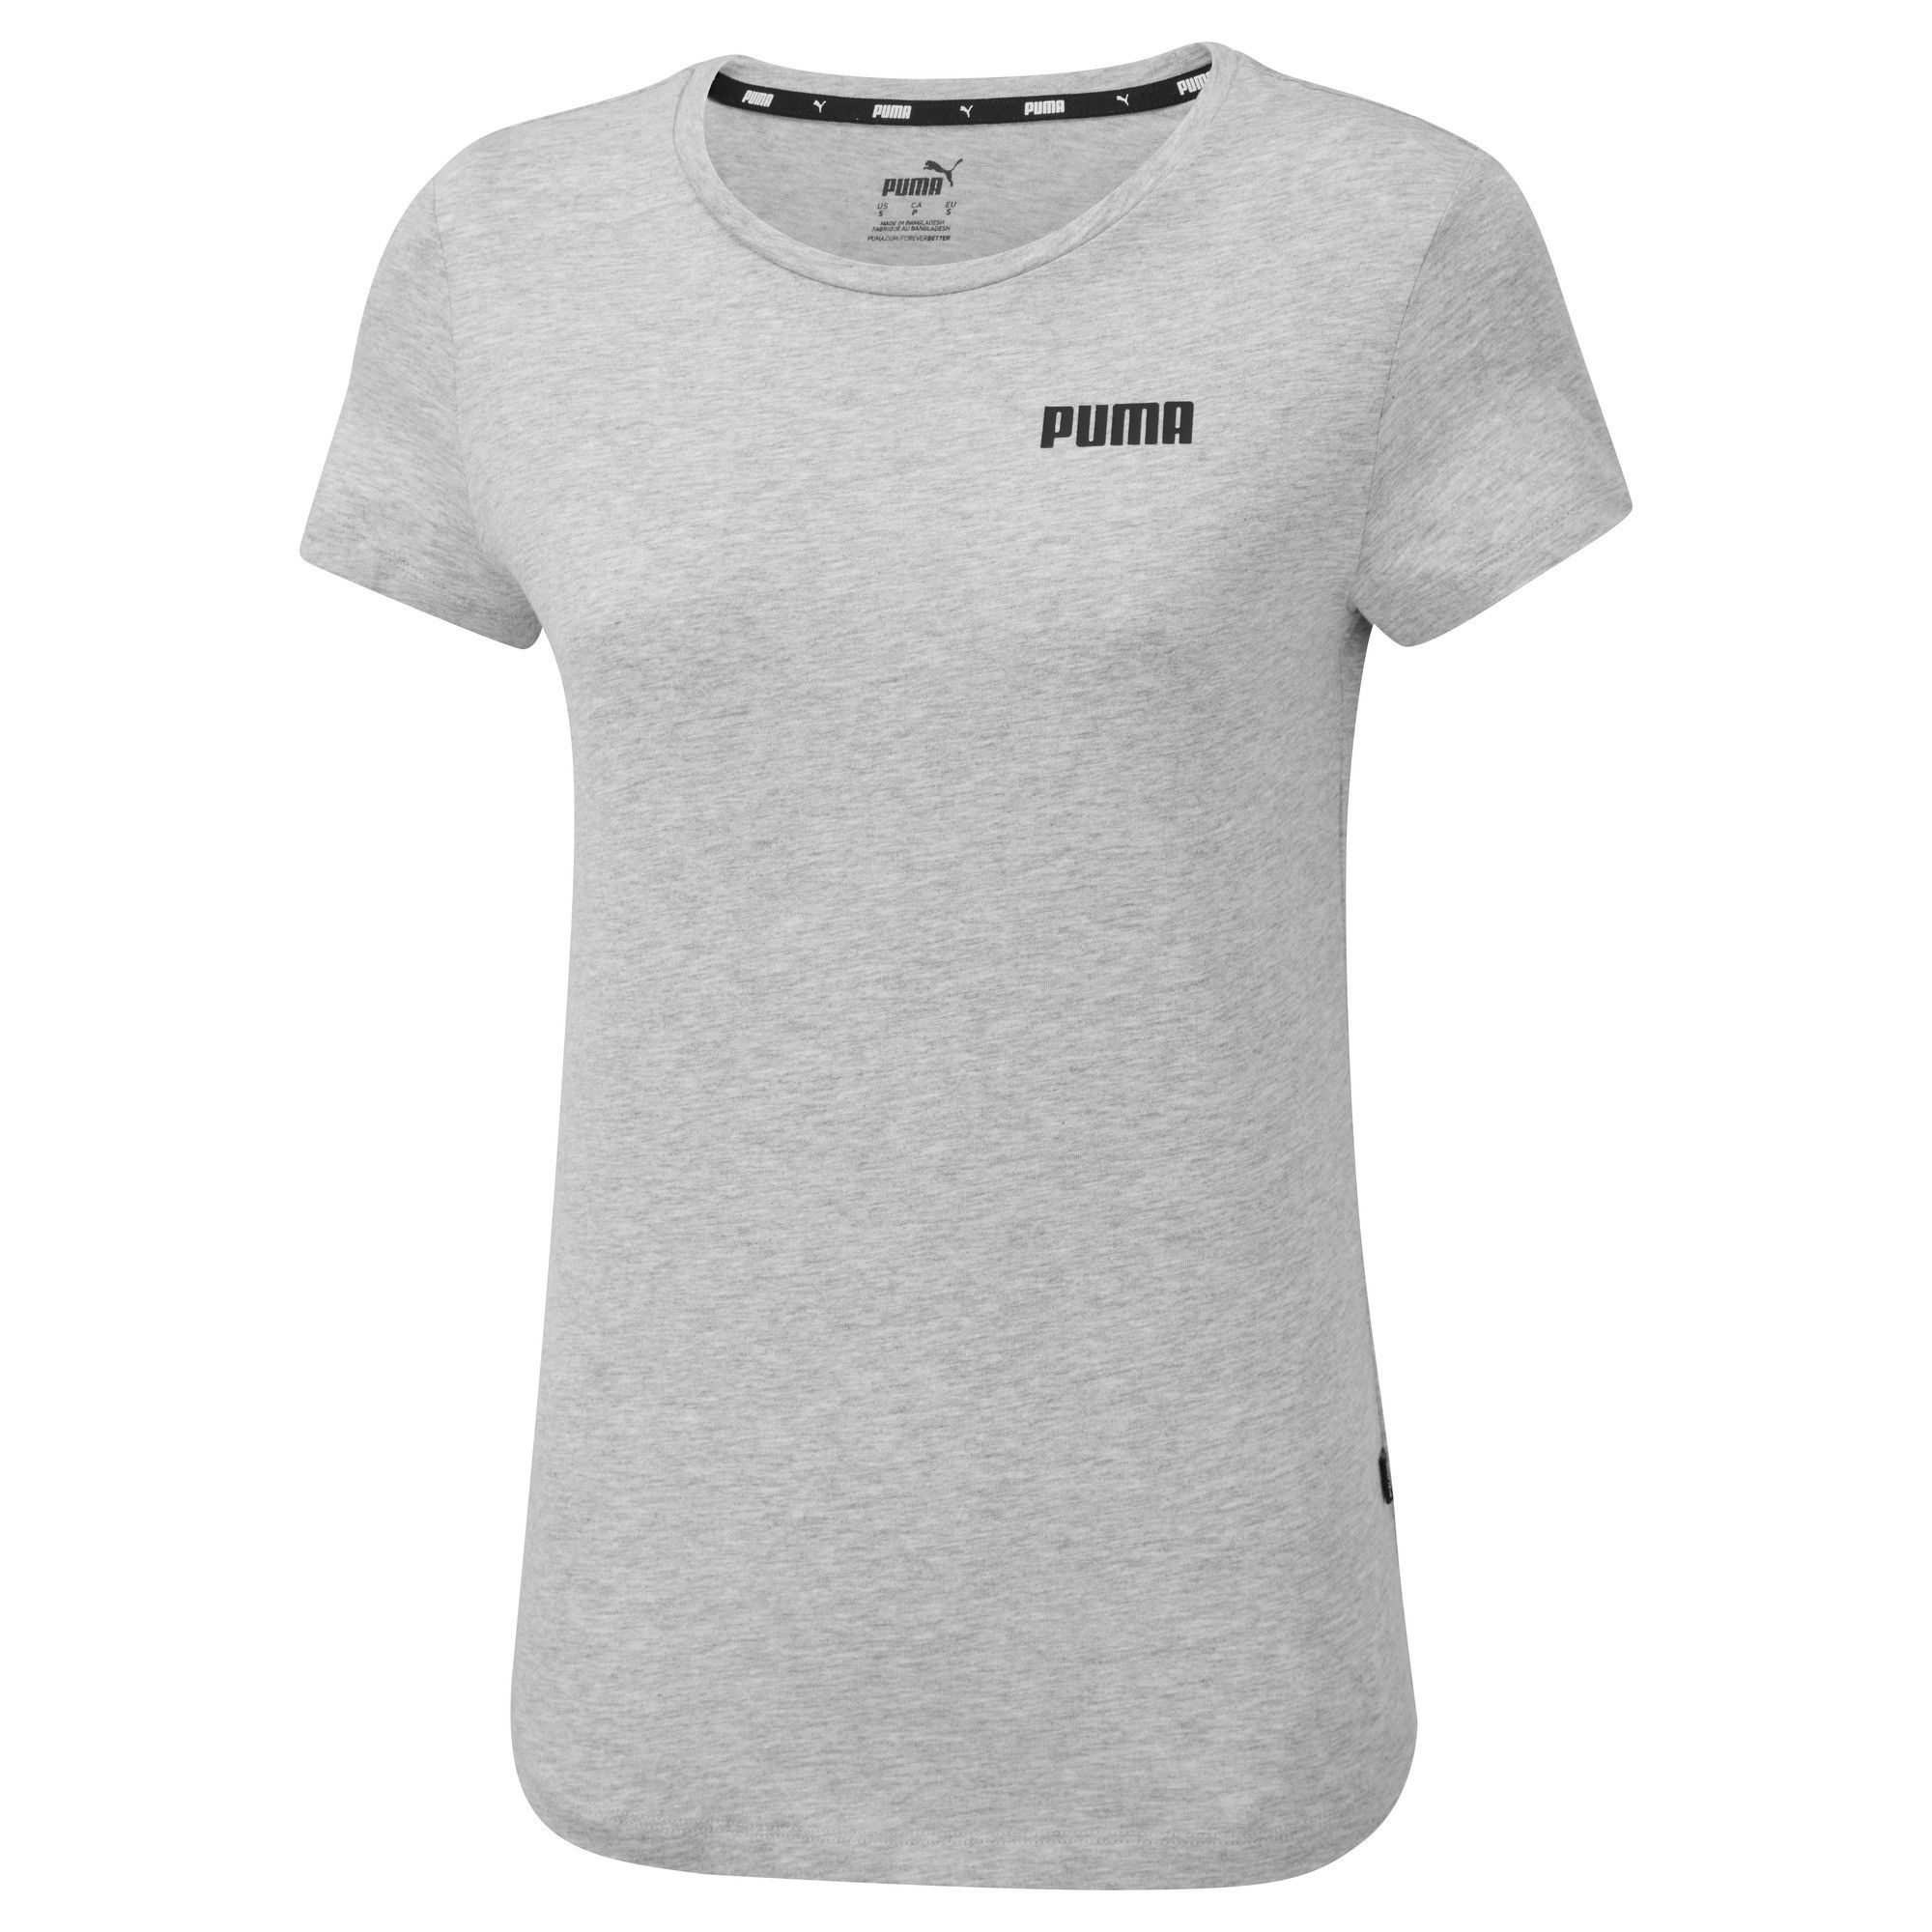  PUMA brings you the latest in style must-haves in our Essentials line – a collection of essential staples made with the street style enthusiast in mind. Our Essentials Tee is the quintessential wardrobe stable for the street style devotee, featuring a classic fit and comfortable fabrication sure to make it a fast favourite. DETAILS Crew neck